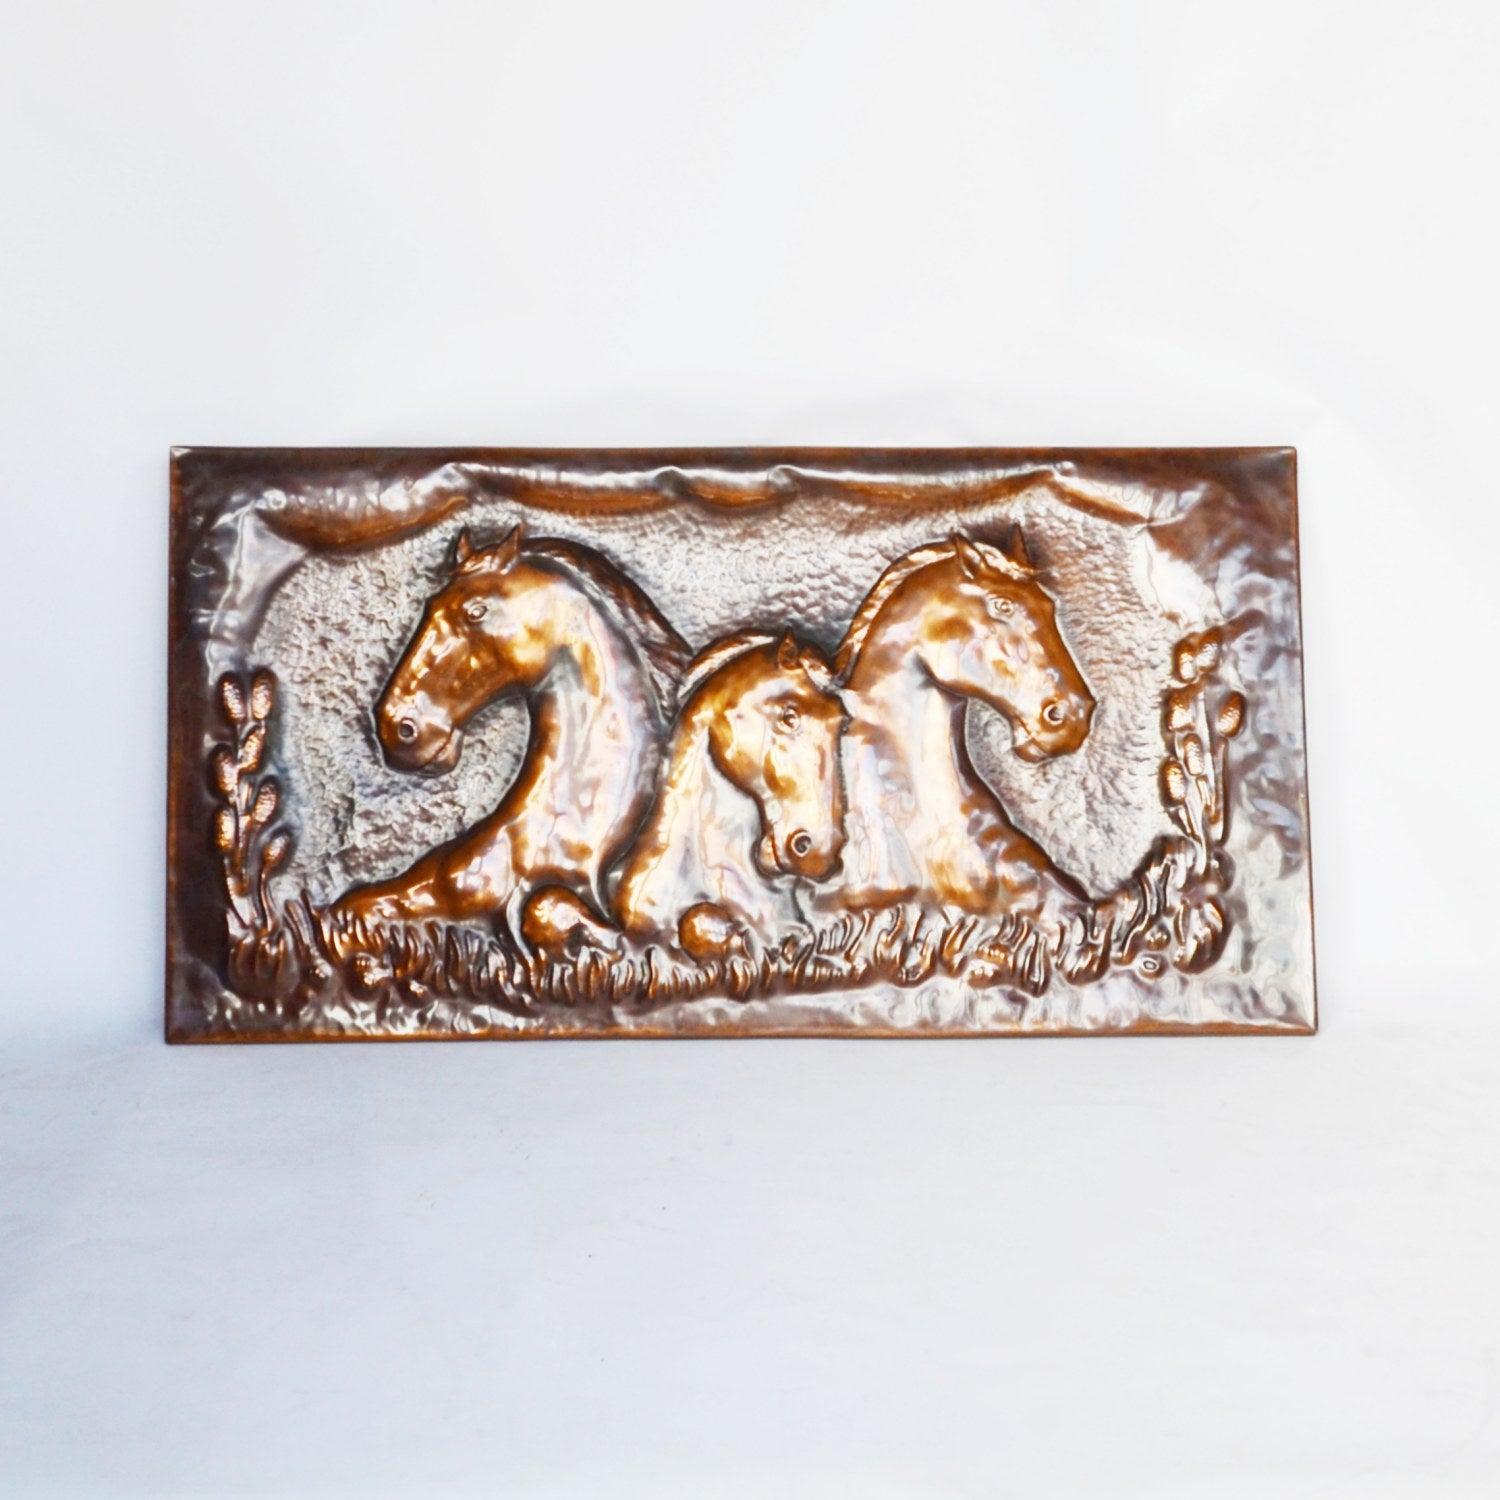 A large equestrian embossed copper plaque. Rectangular plaque with the heads of three rearing horses, surrounded by meadow detail. 

Dimensions: H 55cm W 107cm D 2cm 

Origin: English

Date: Contemporary

Item Number: 2409208.